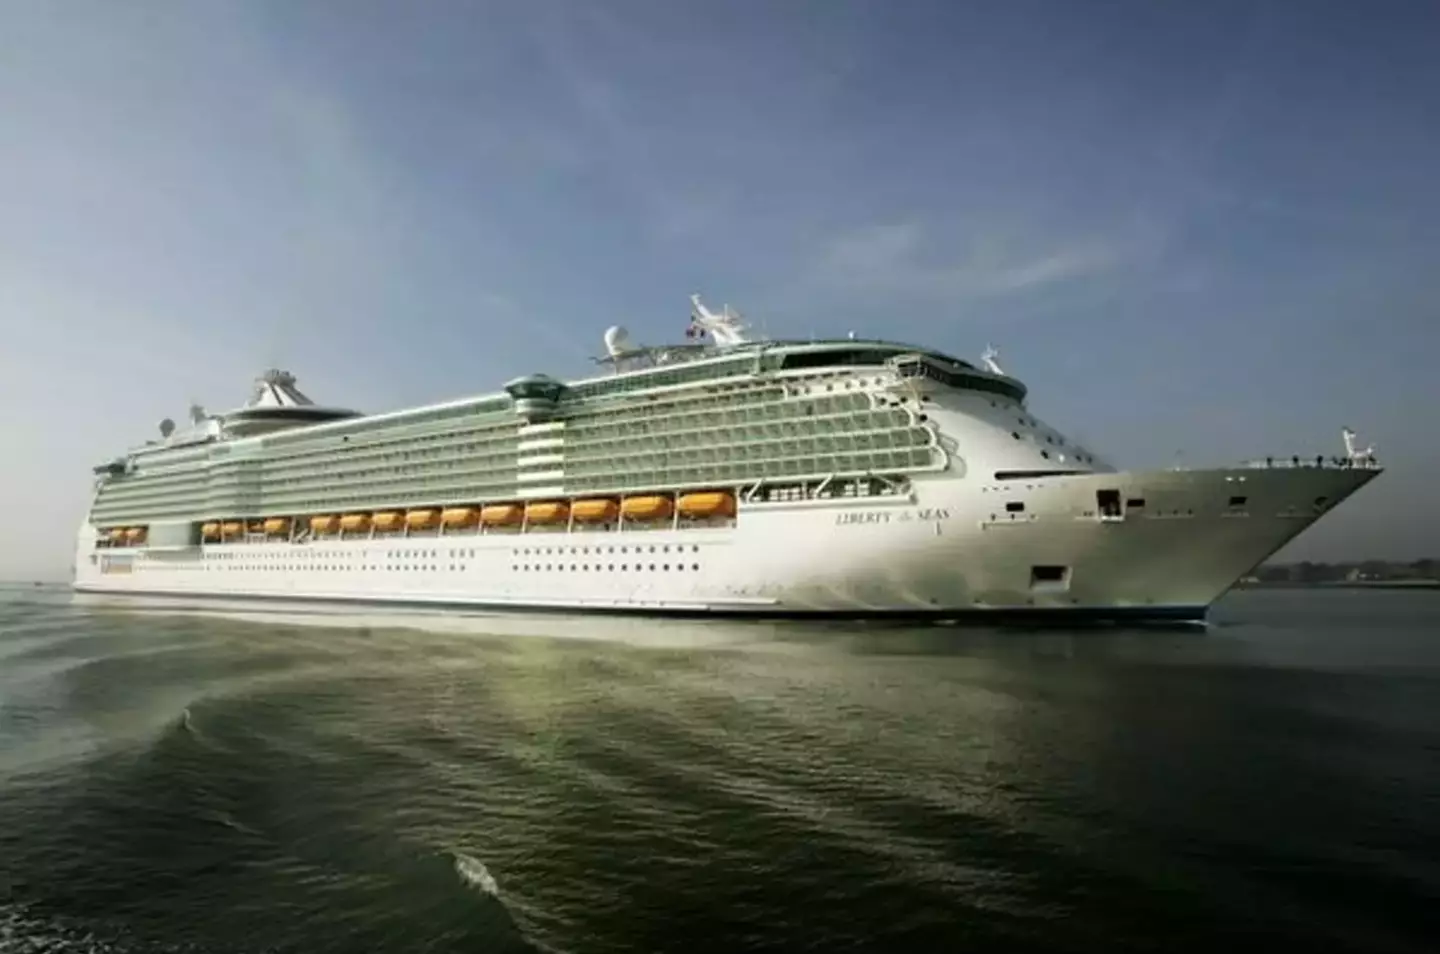 The cruise company has denied serving the 20-year-old alcohol after other passengers claimed he was 'pretty drunk' when the incident occurred.